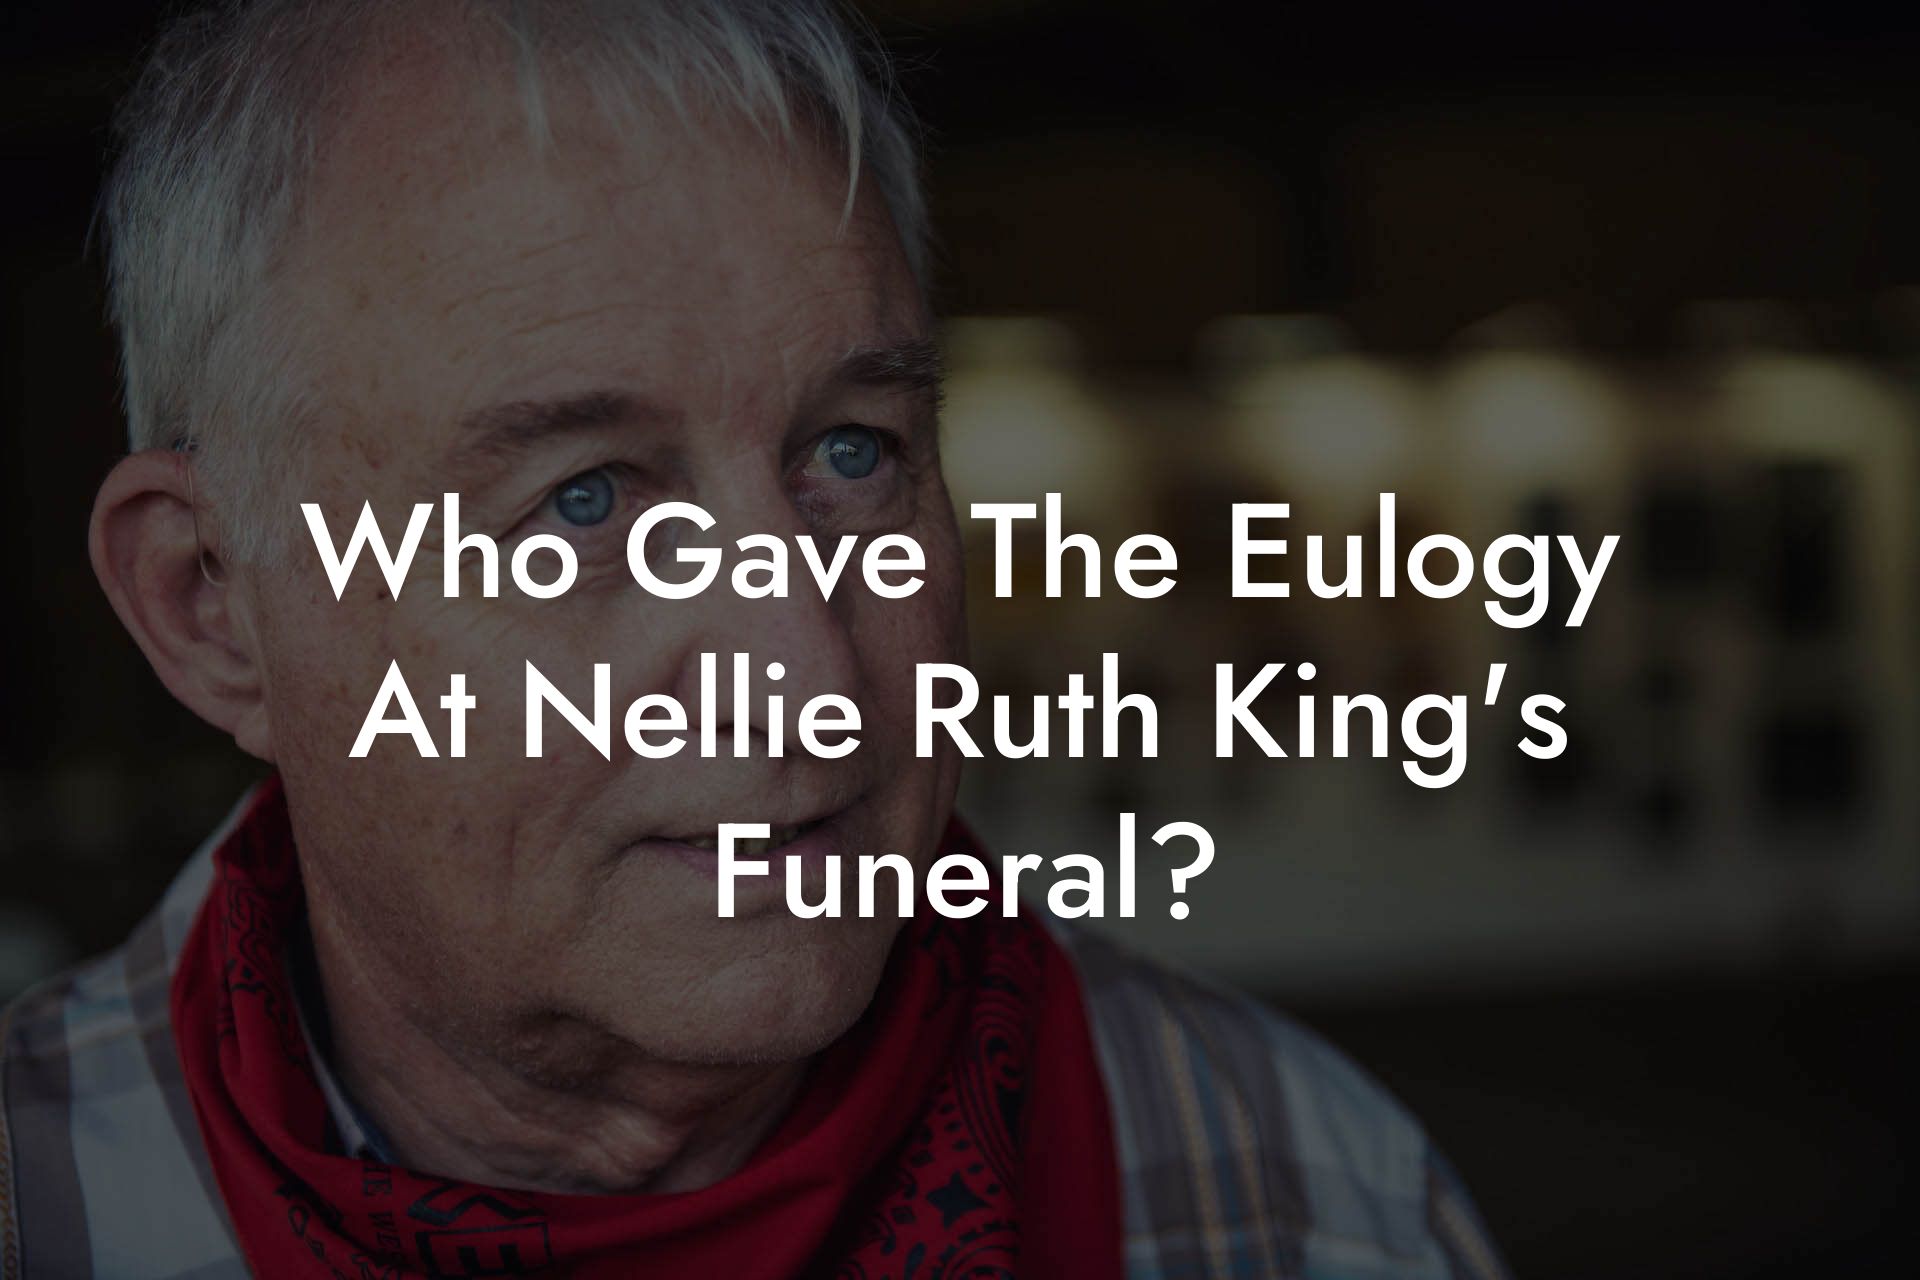 Who Gave The Eulogy At Nellie Ruth King's Funeral?